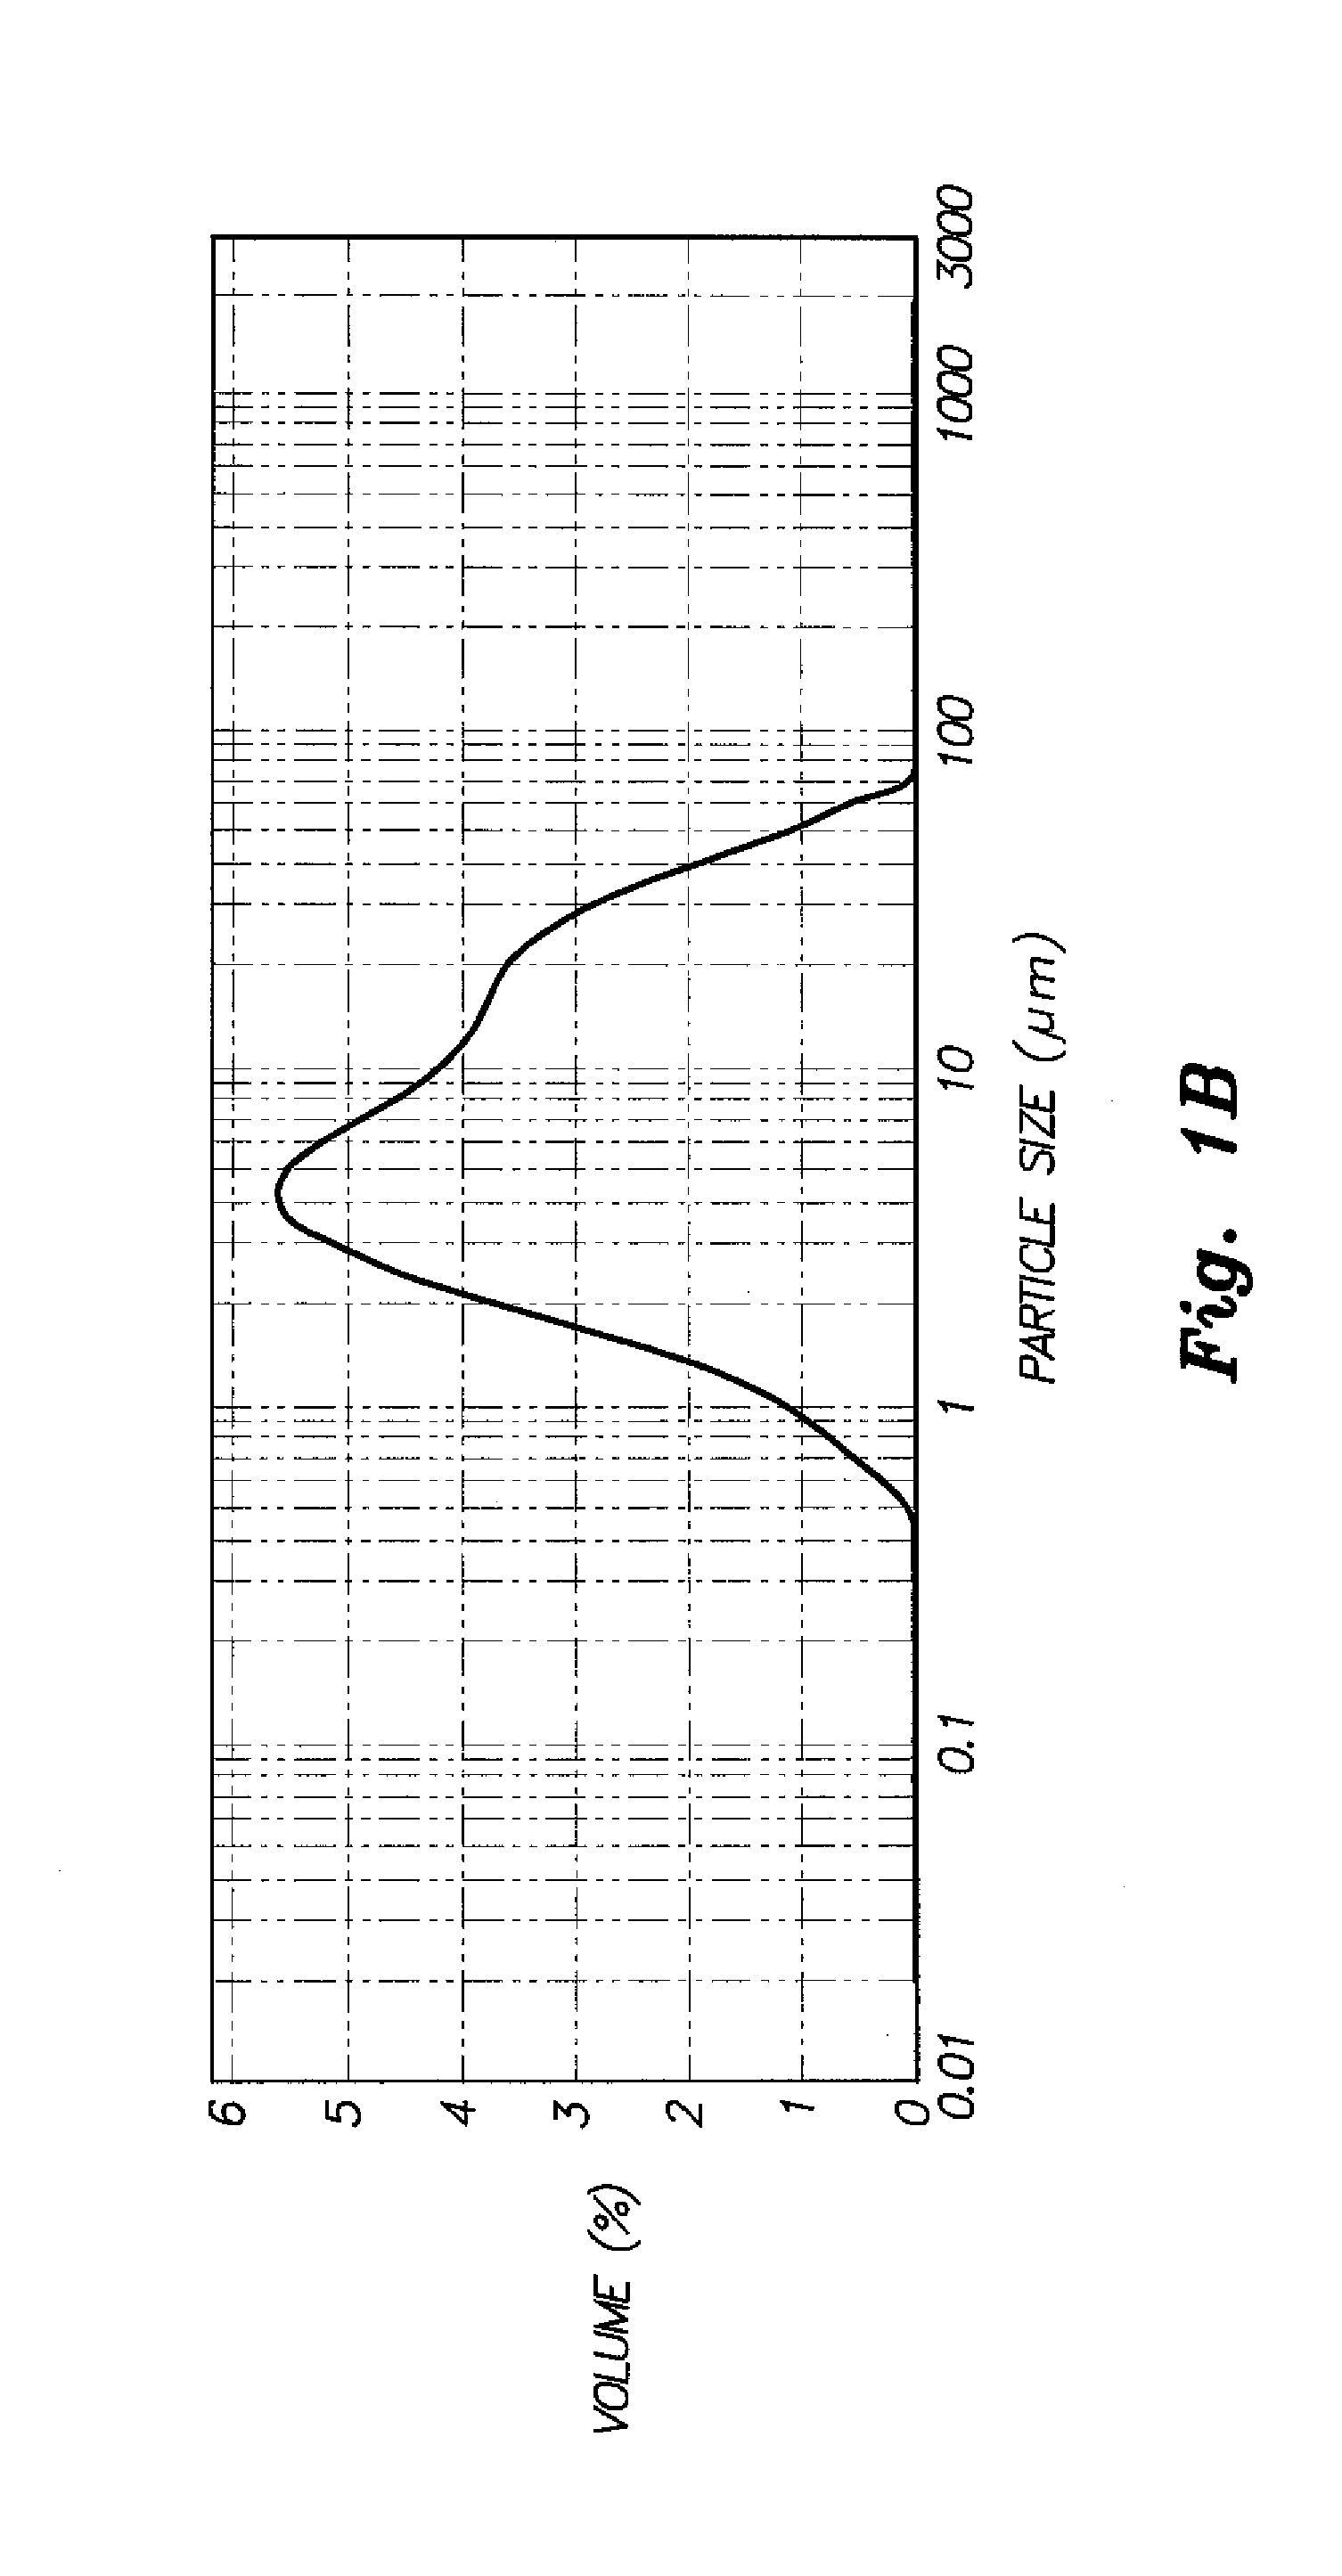 Multiple zeolite catalyst and method of using the same for toluene disproportionation